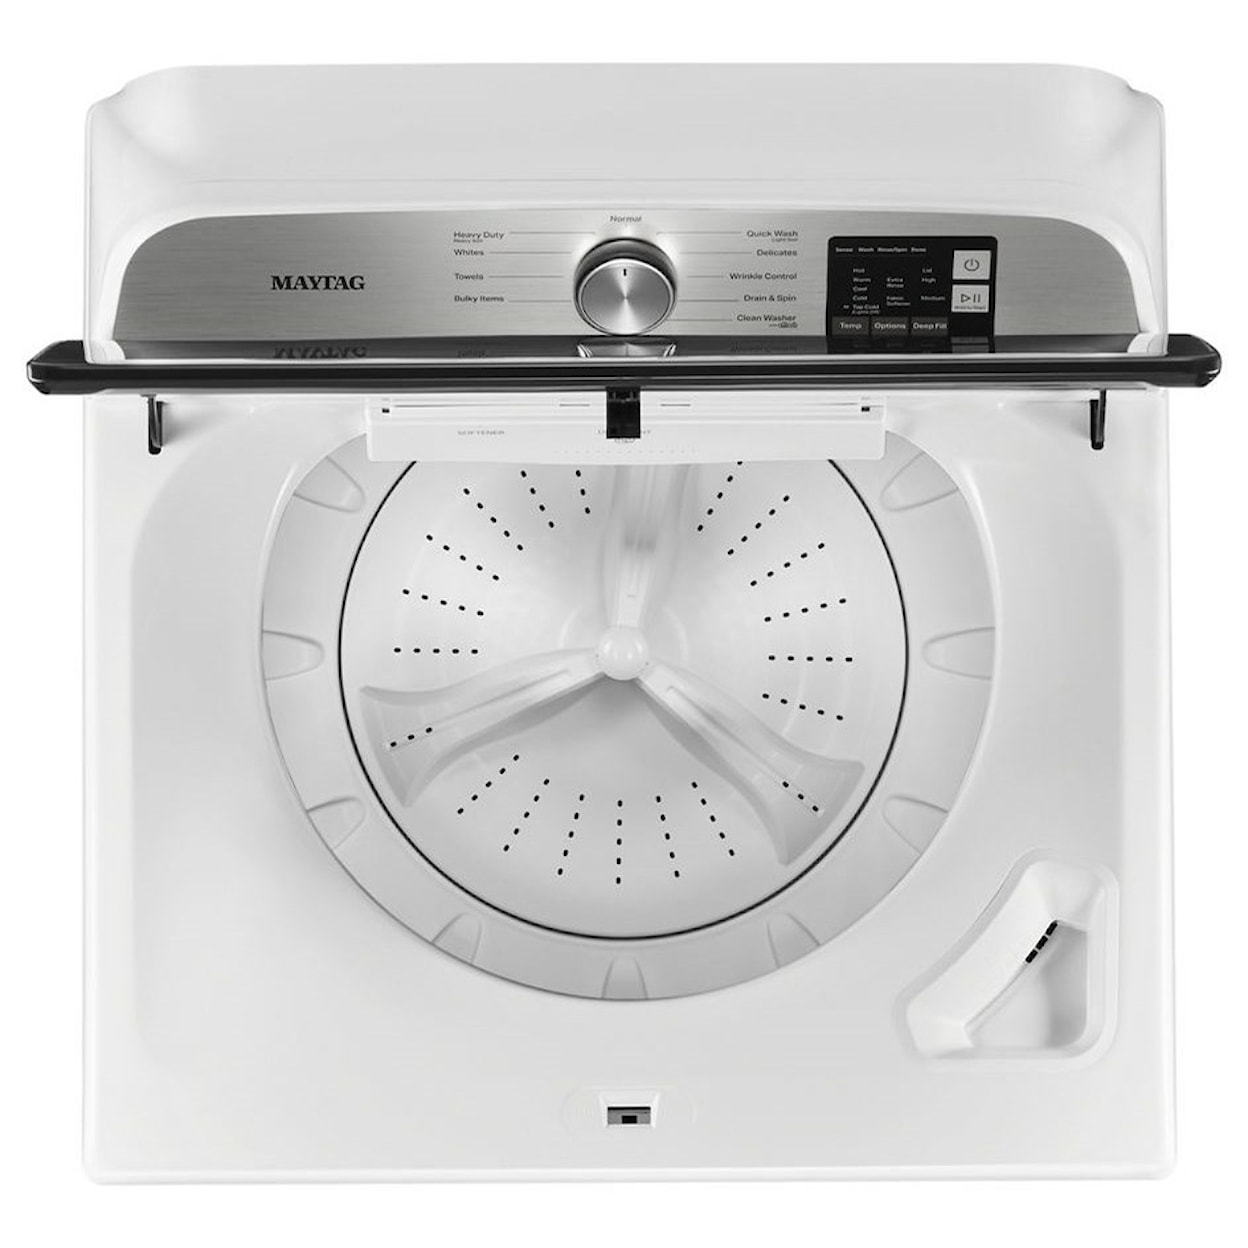 Maytag Top Load Washers 4.8 CU. FT. Top Load Washer